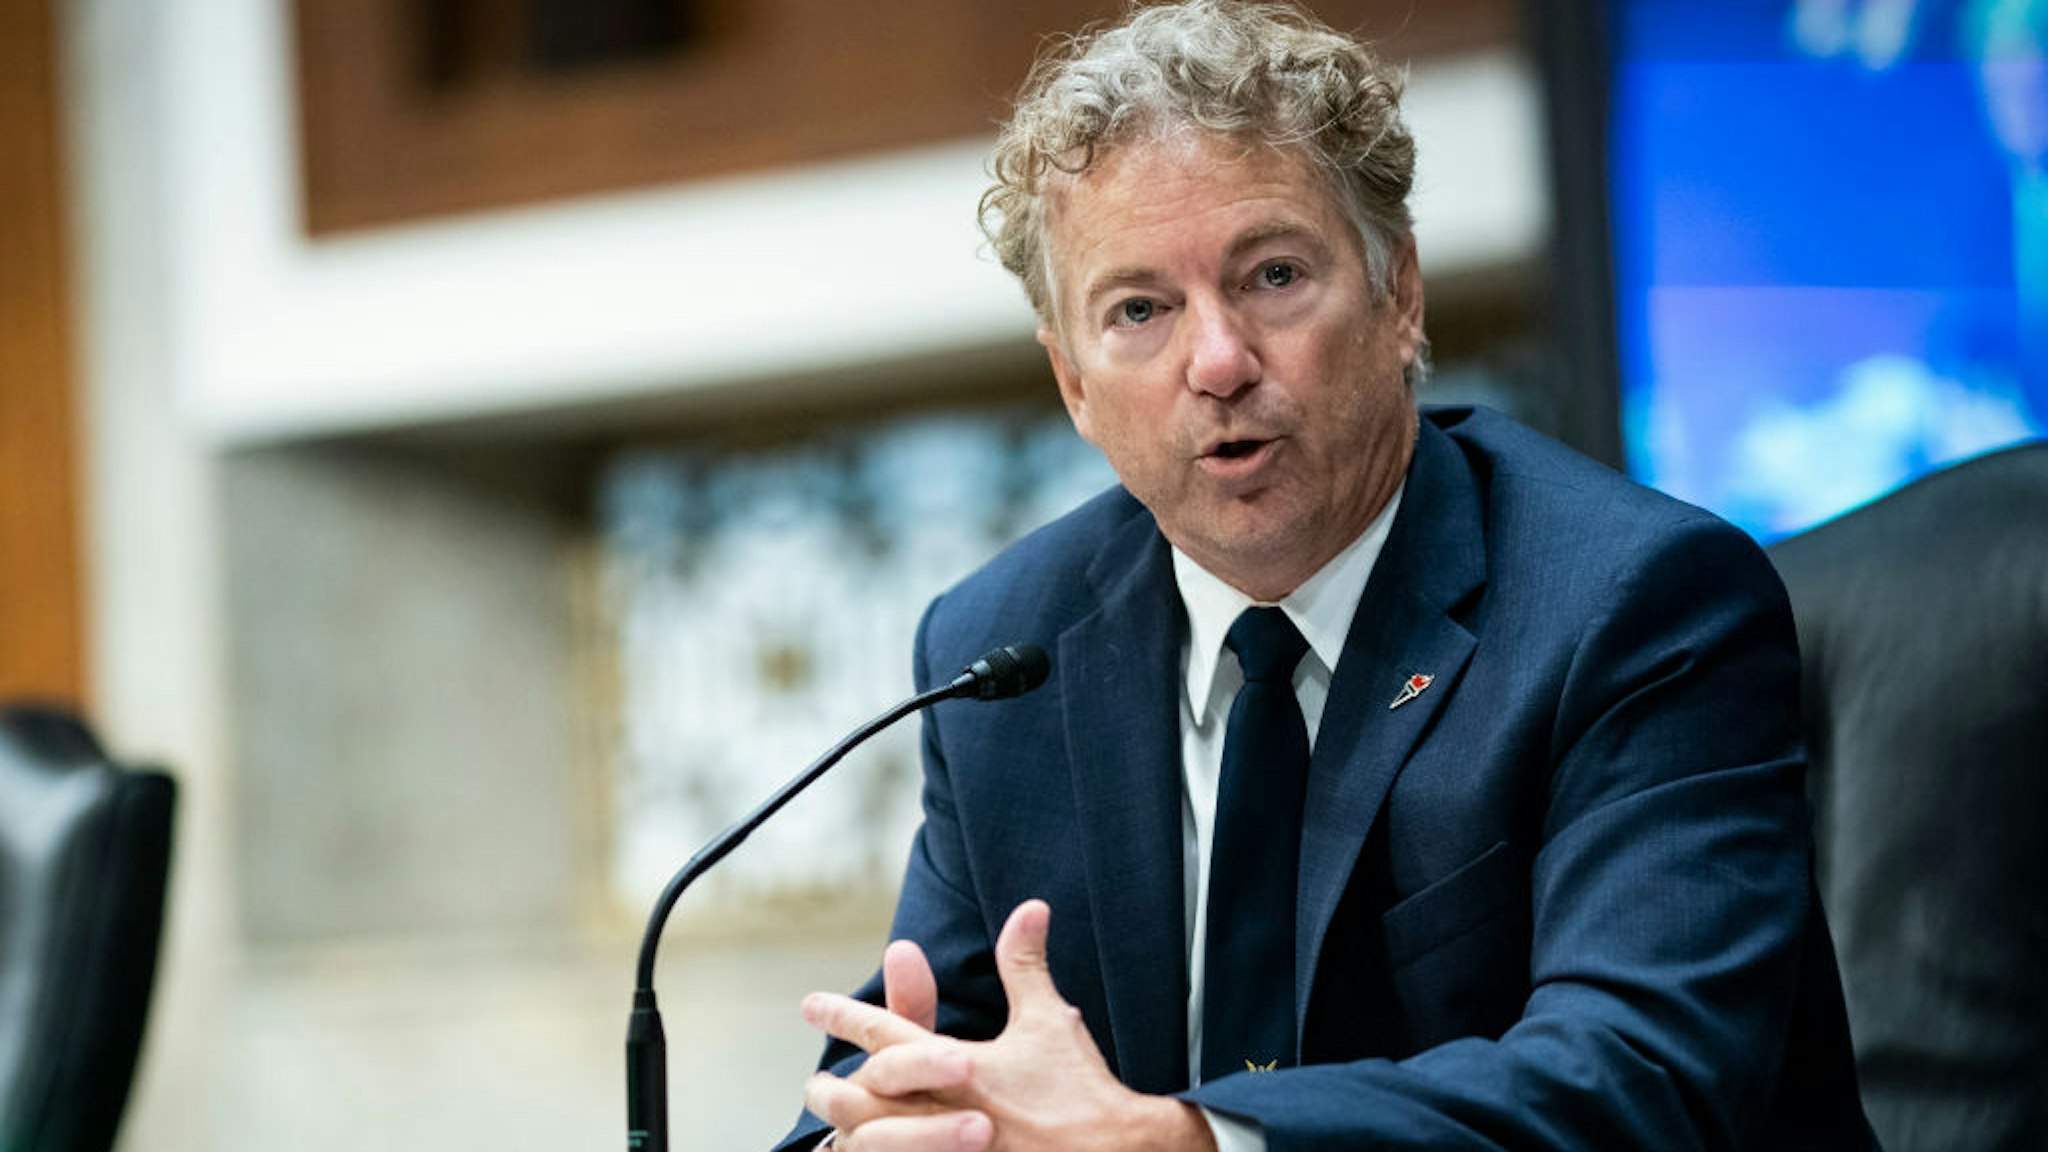 WASHINGTON, DC - JUNE 30: Sen. Rand Paul (R-KY) speaks during a Senate Health, Education, Labor and Pensions Committee hearing on June 30, 2020 in Washington, DC. The committee will discuss efforts to safely get back to work and school during the coronavirus pandemic.